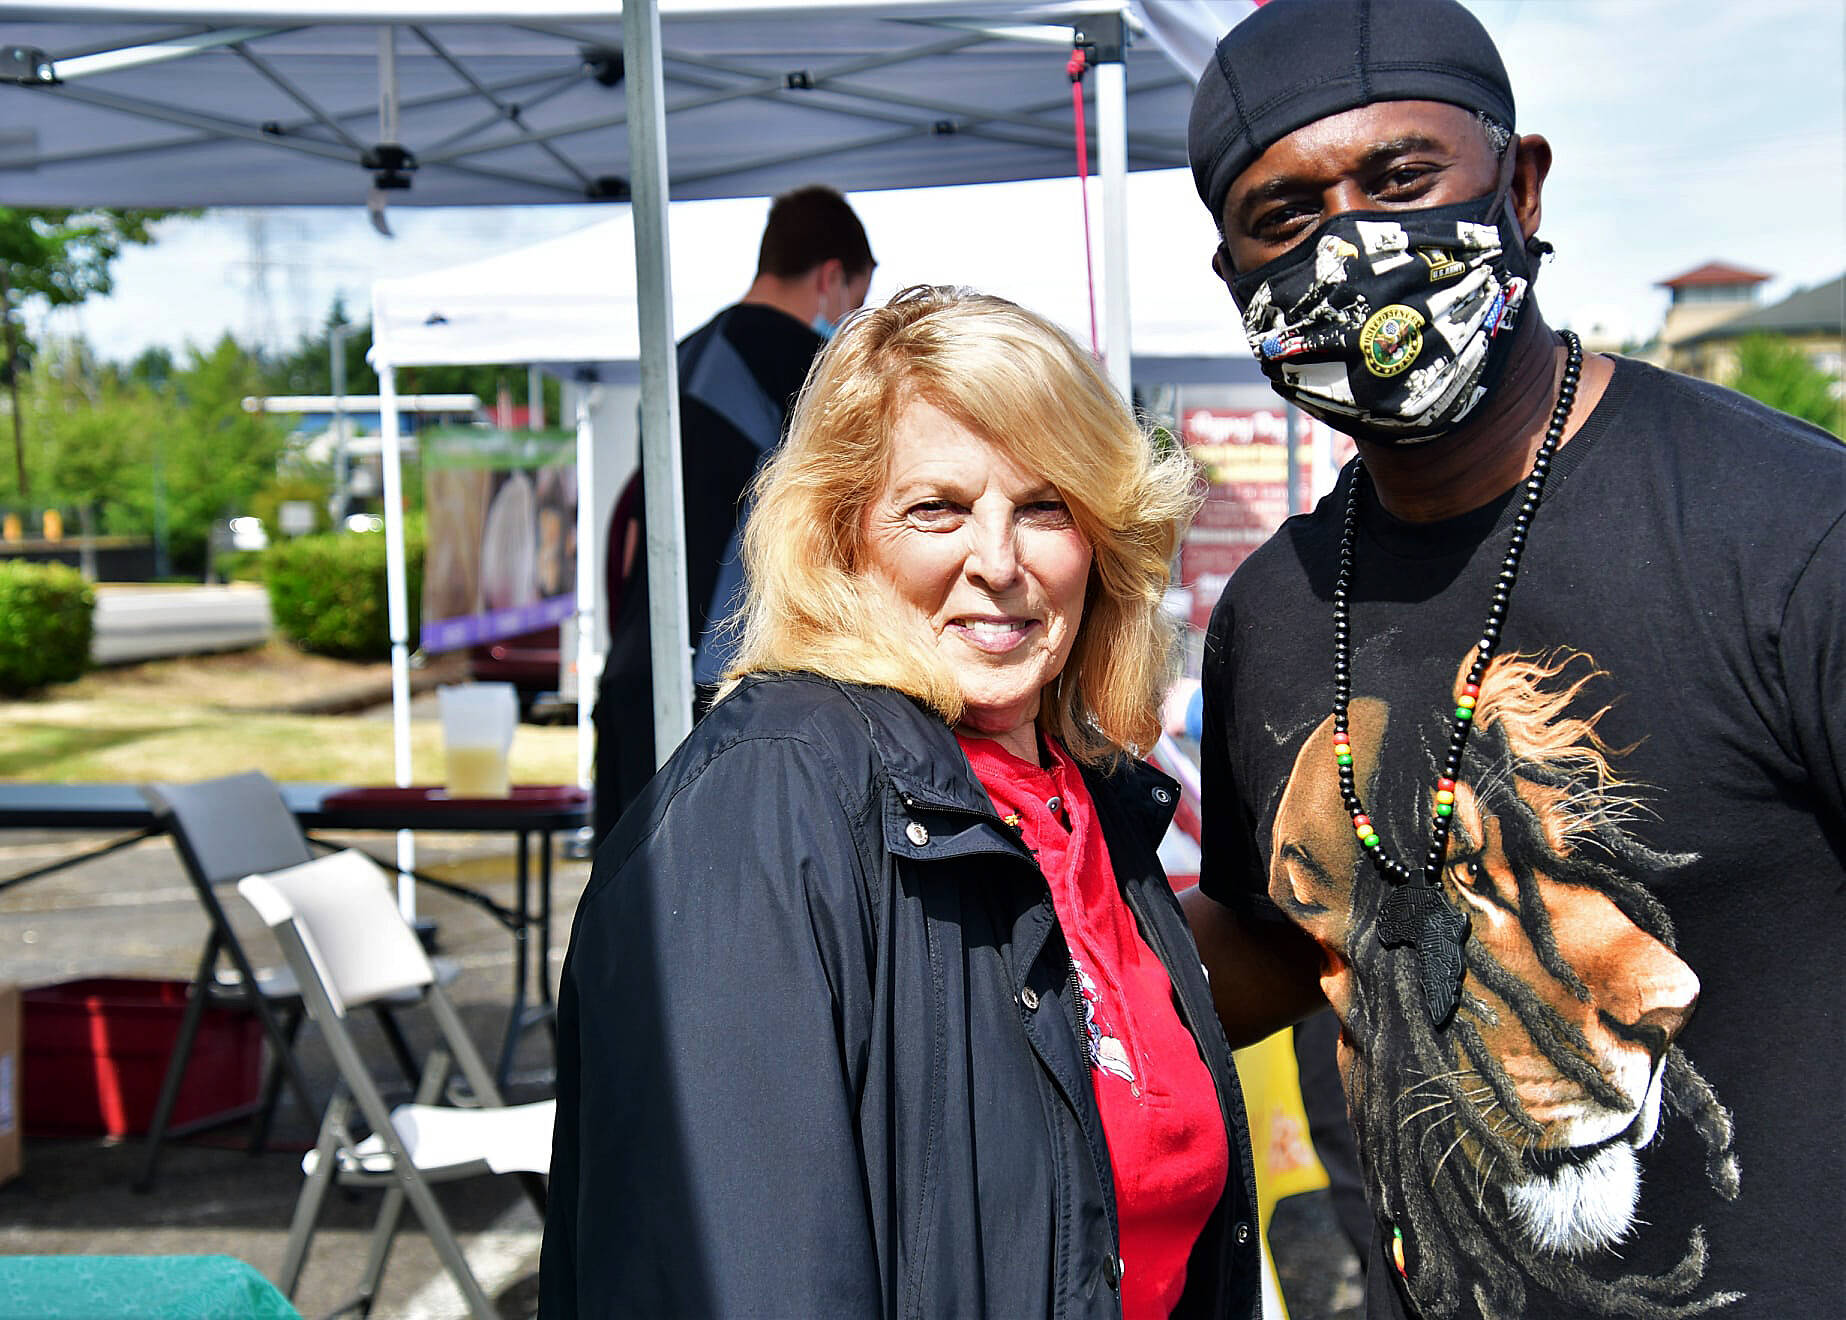 Photo courtesy of Bruce Honda
Rose Ehl, left, stands with Federal Way Farmers Market DJ LaMont Atkinson.